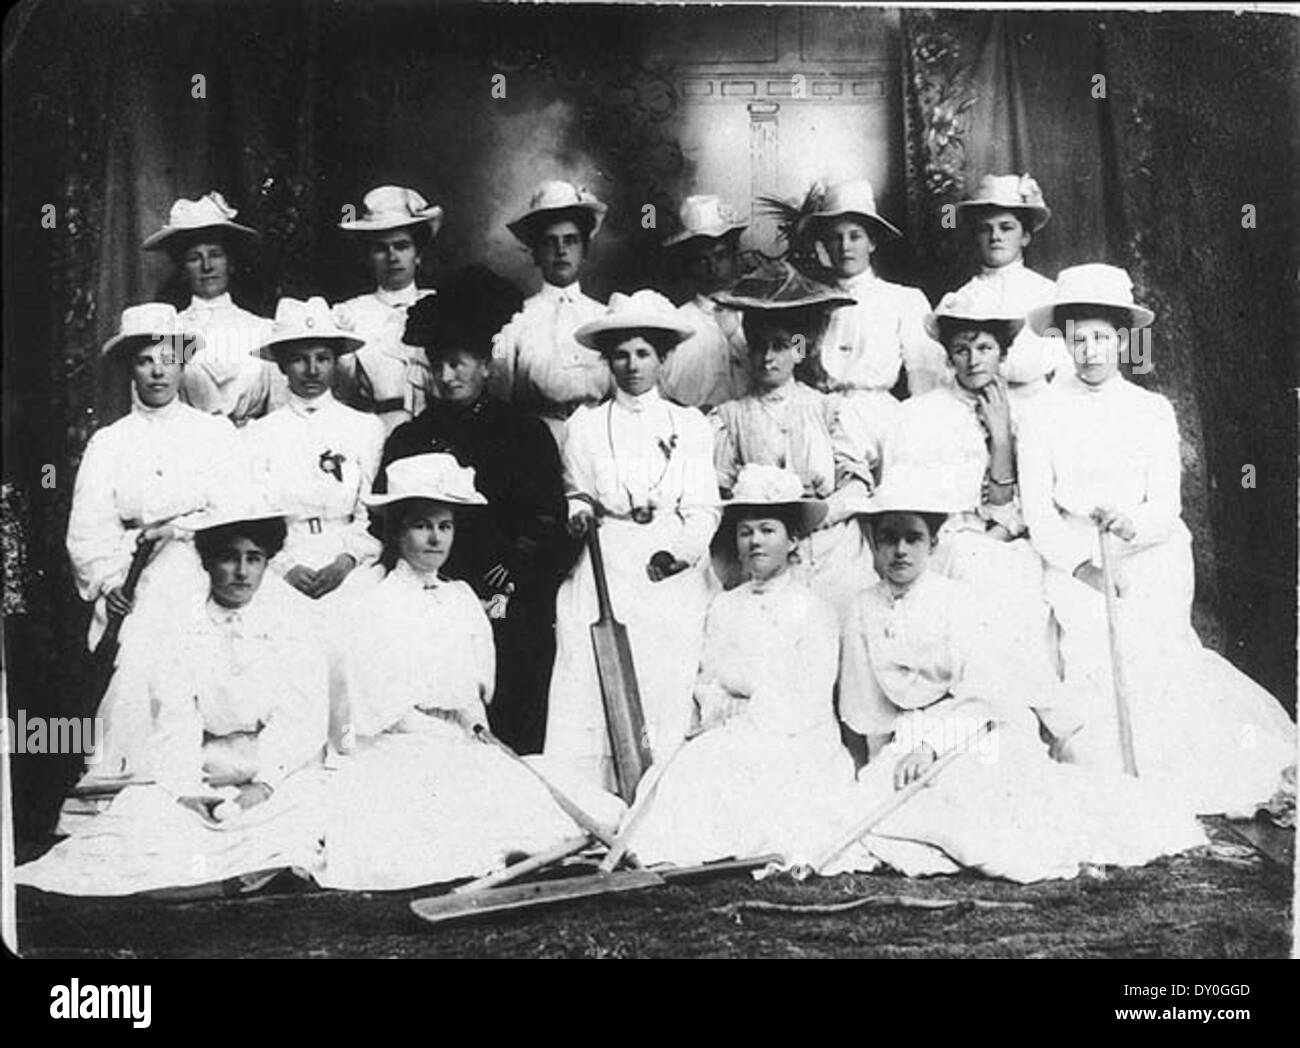 Bega Women's cricket team. Captain was Mrs Evershed (wife of Dr Evershed) - Bega, NSW, n.d. / by unknown photographer Stock Photo